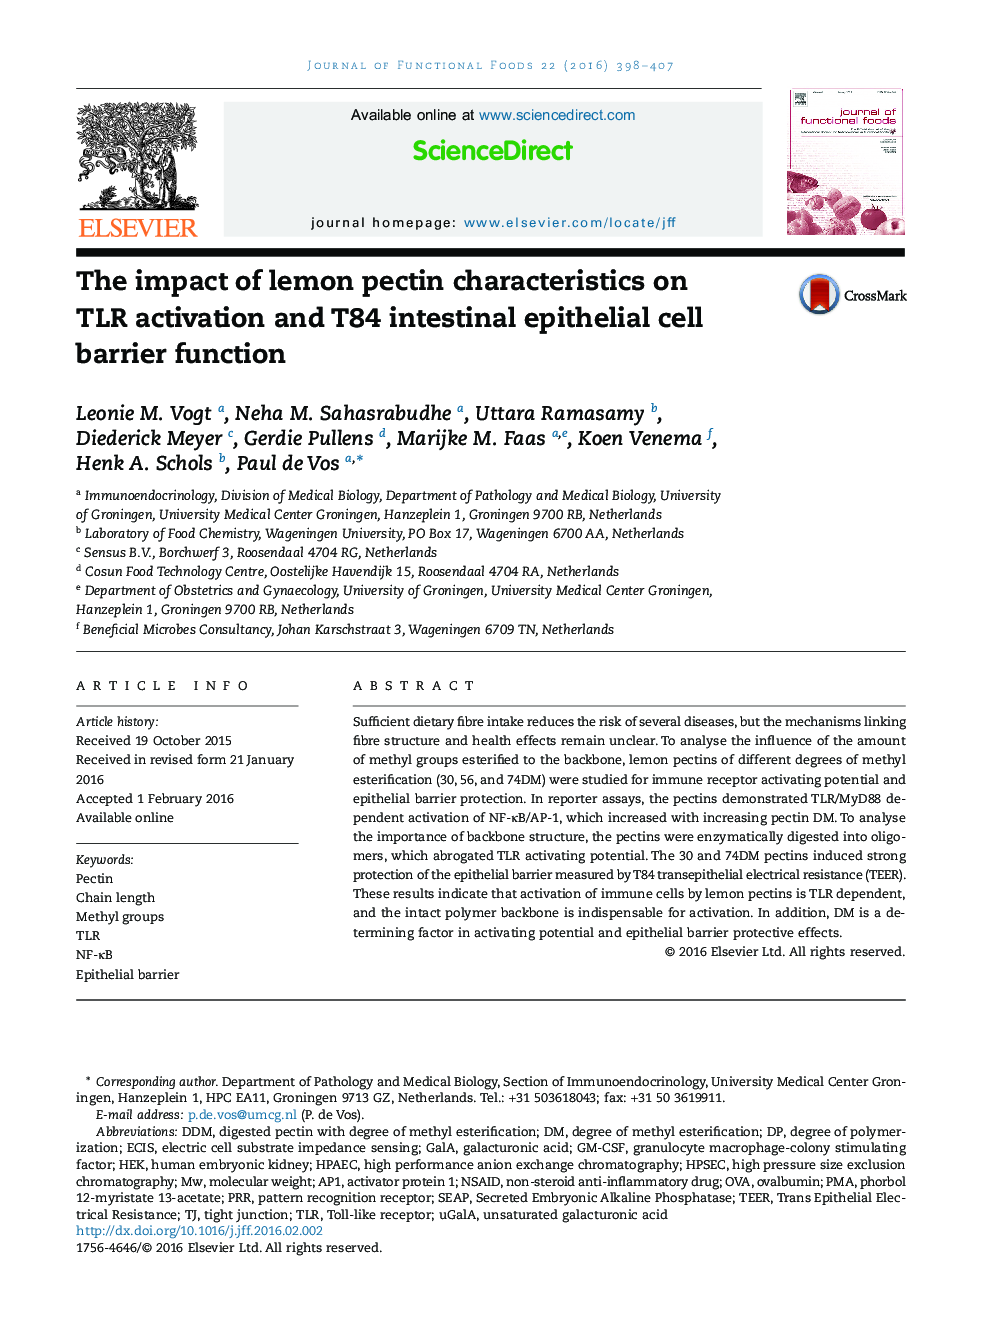 The impact of lemon pectin characteristics on TLR activation and T84 intestinal epithelial cell barrier function